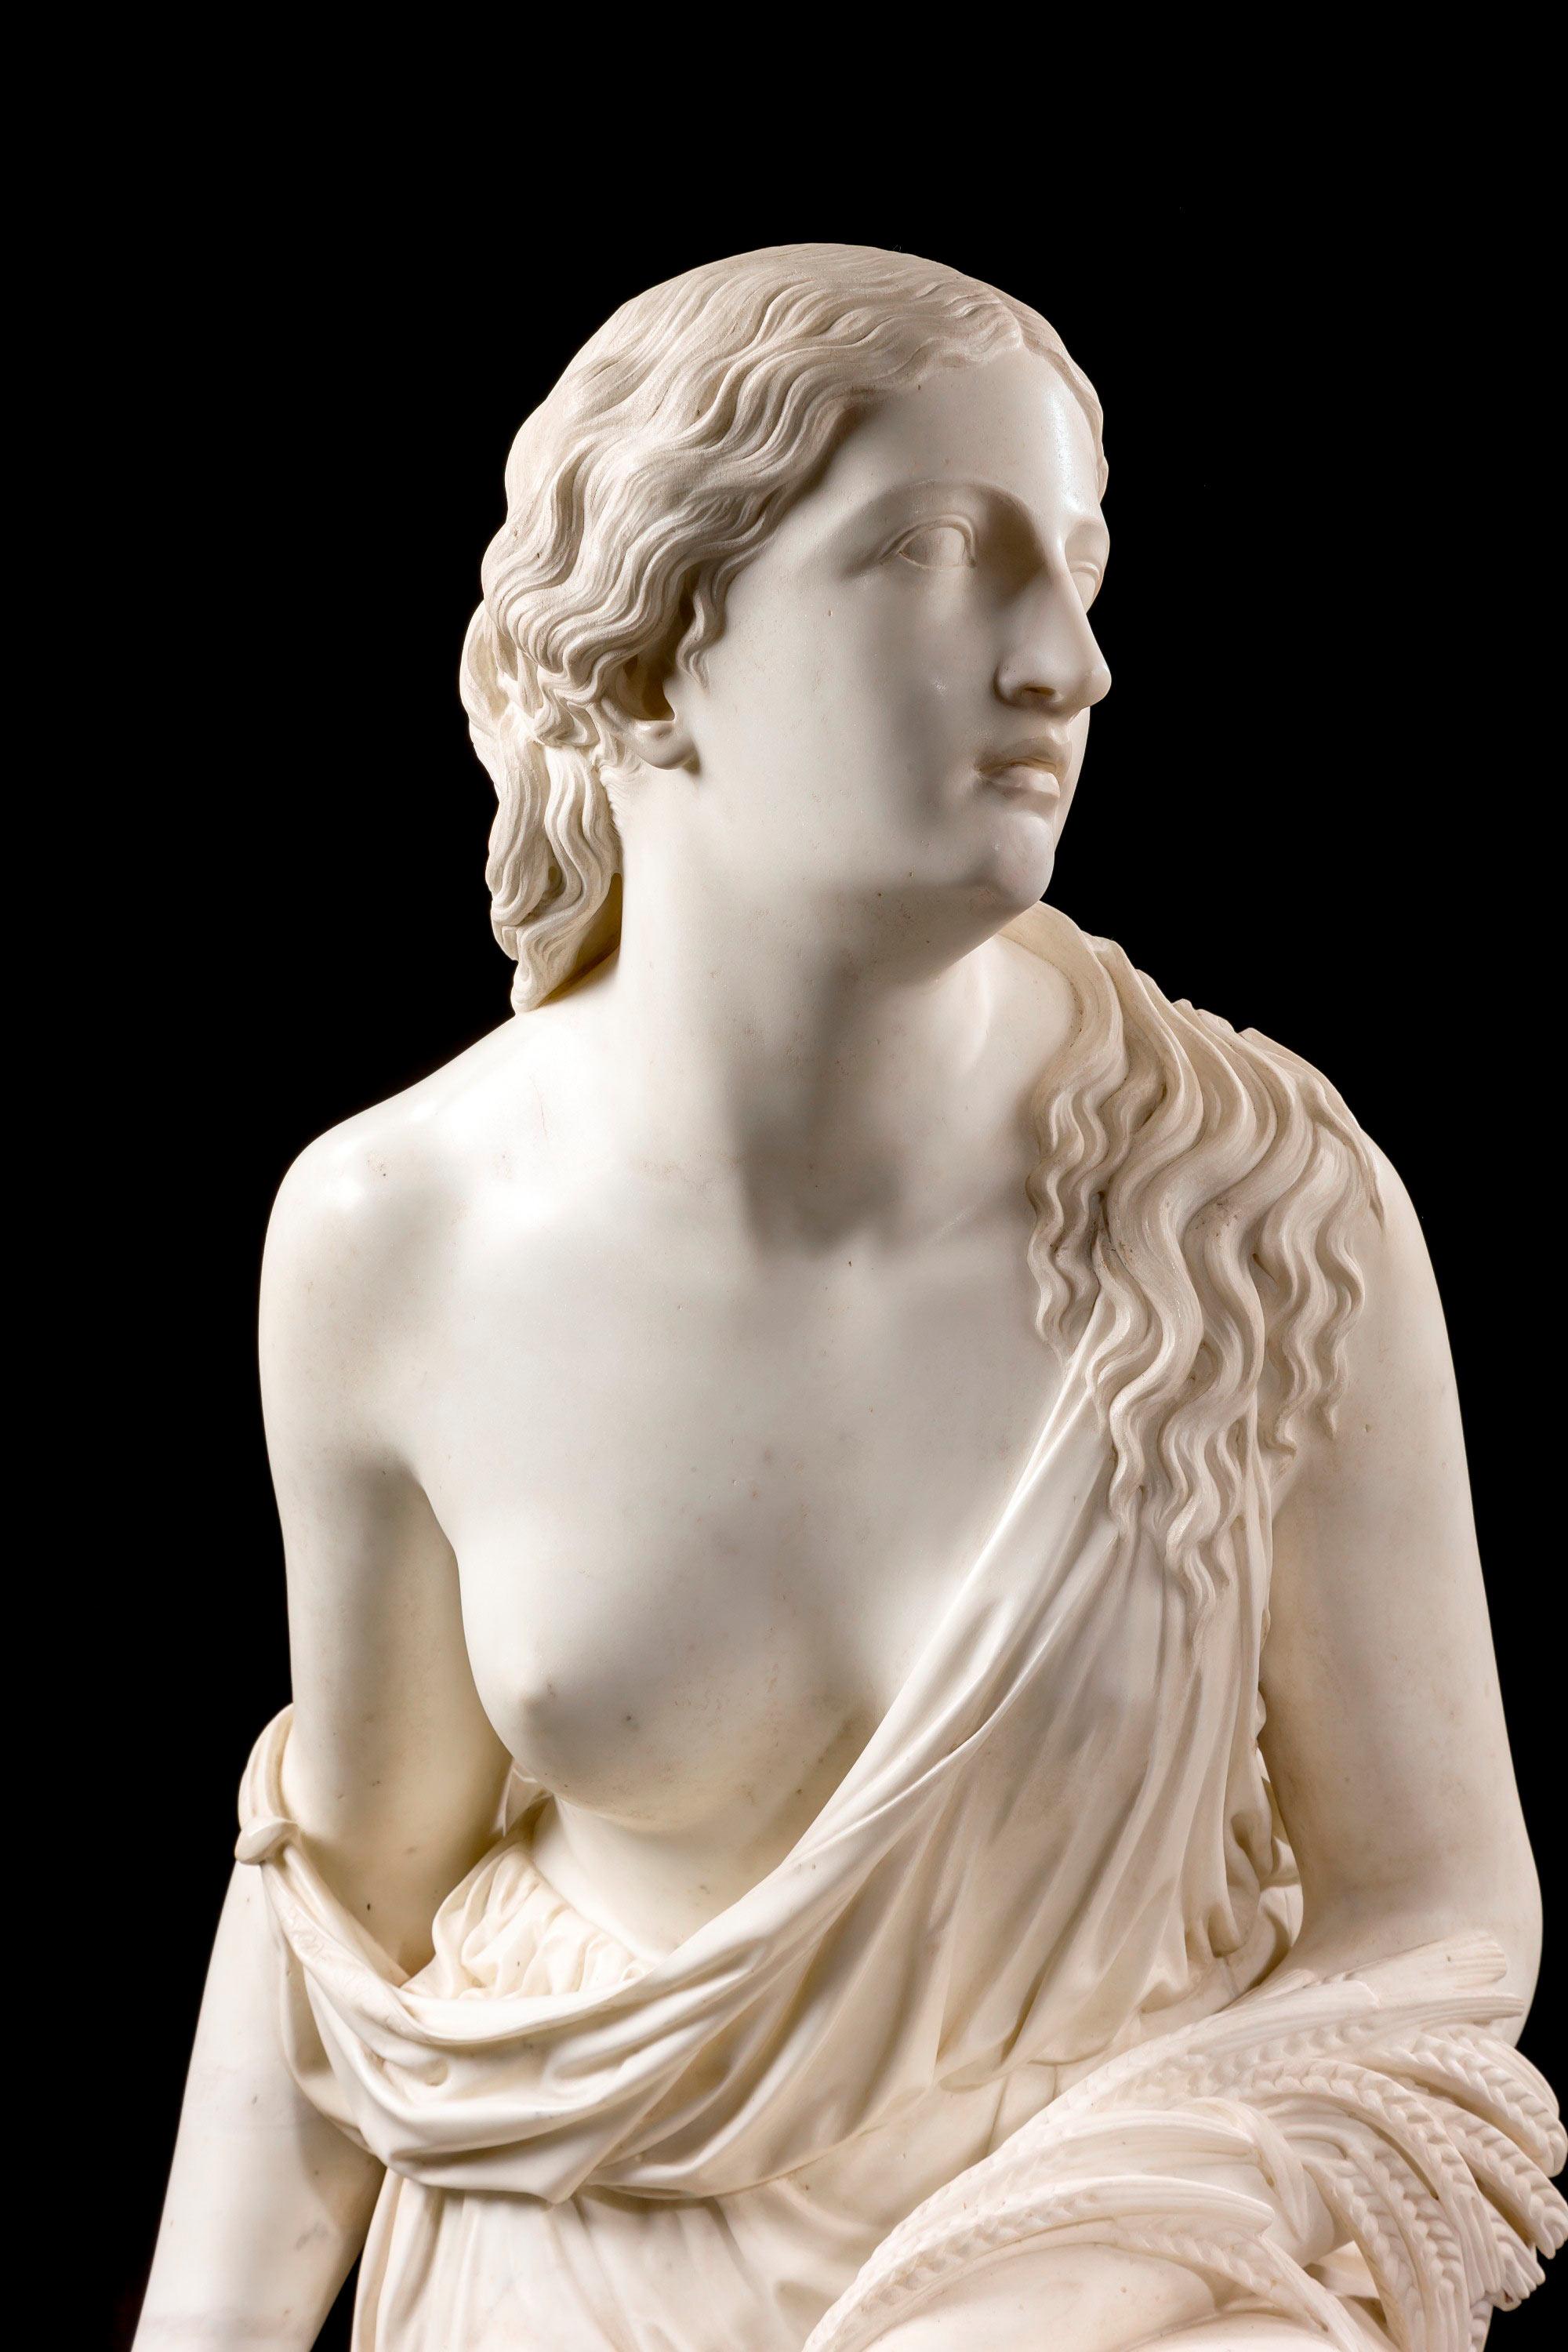 European Bust of a Girl with Barley